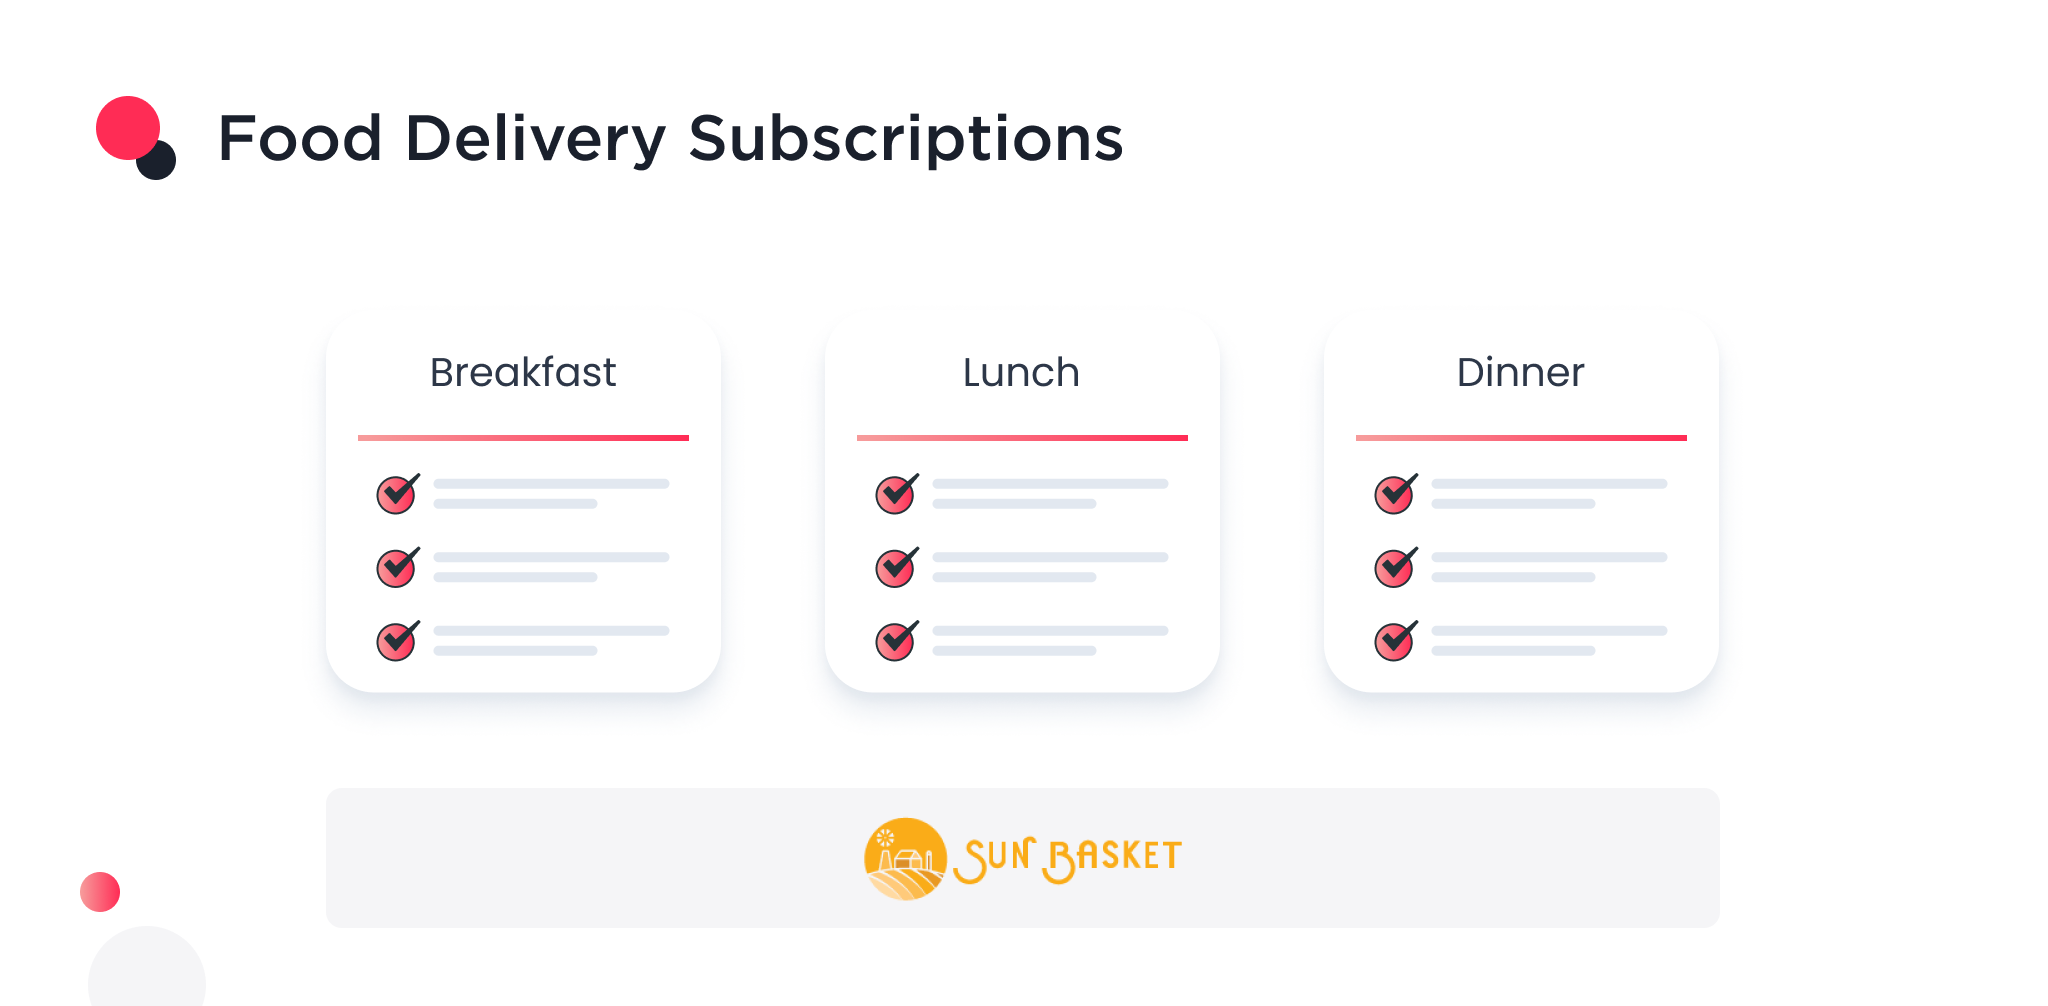 the image shows the food delivery subscriptions